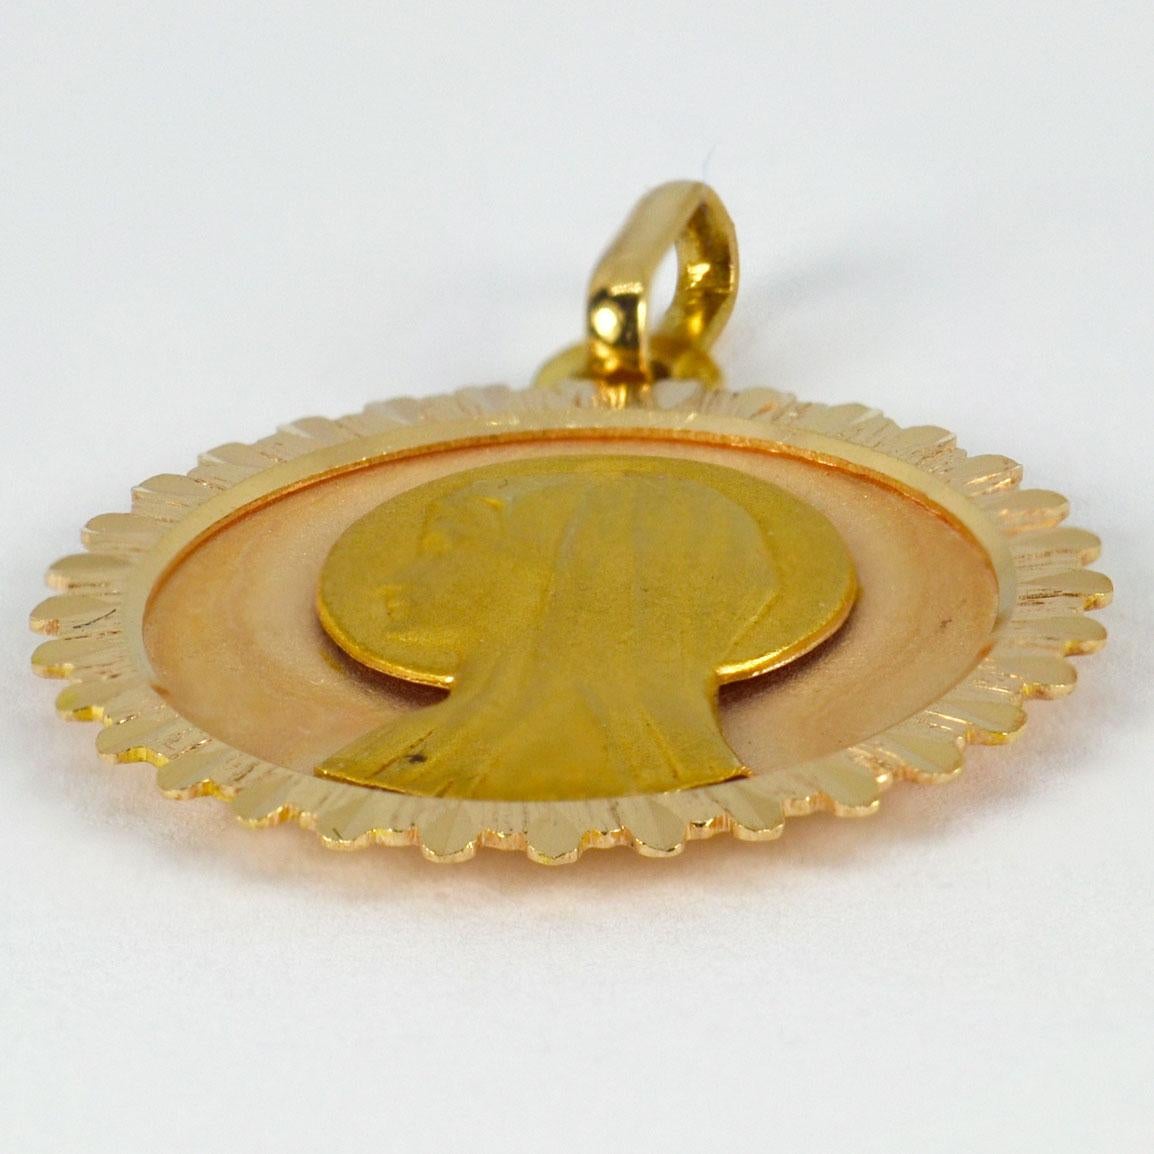 An 18 karat (18K) yellow gold pendant designed as a round medal depicting the Virgin Mary against a sunburst ground. Stamped with the eagle’s head for French manufacture and 18 karat gold, with unknown maker’s mark.

Dimensions: 2.6 x 2.3 x 0.2 cm